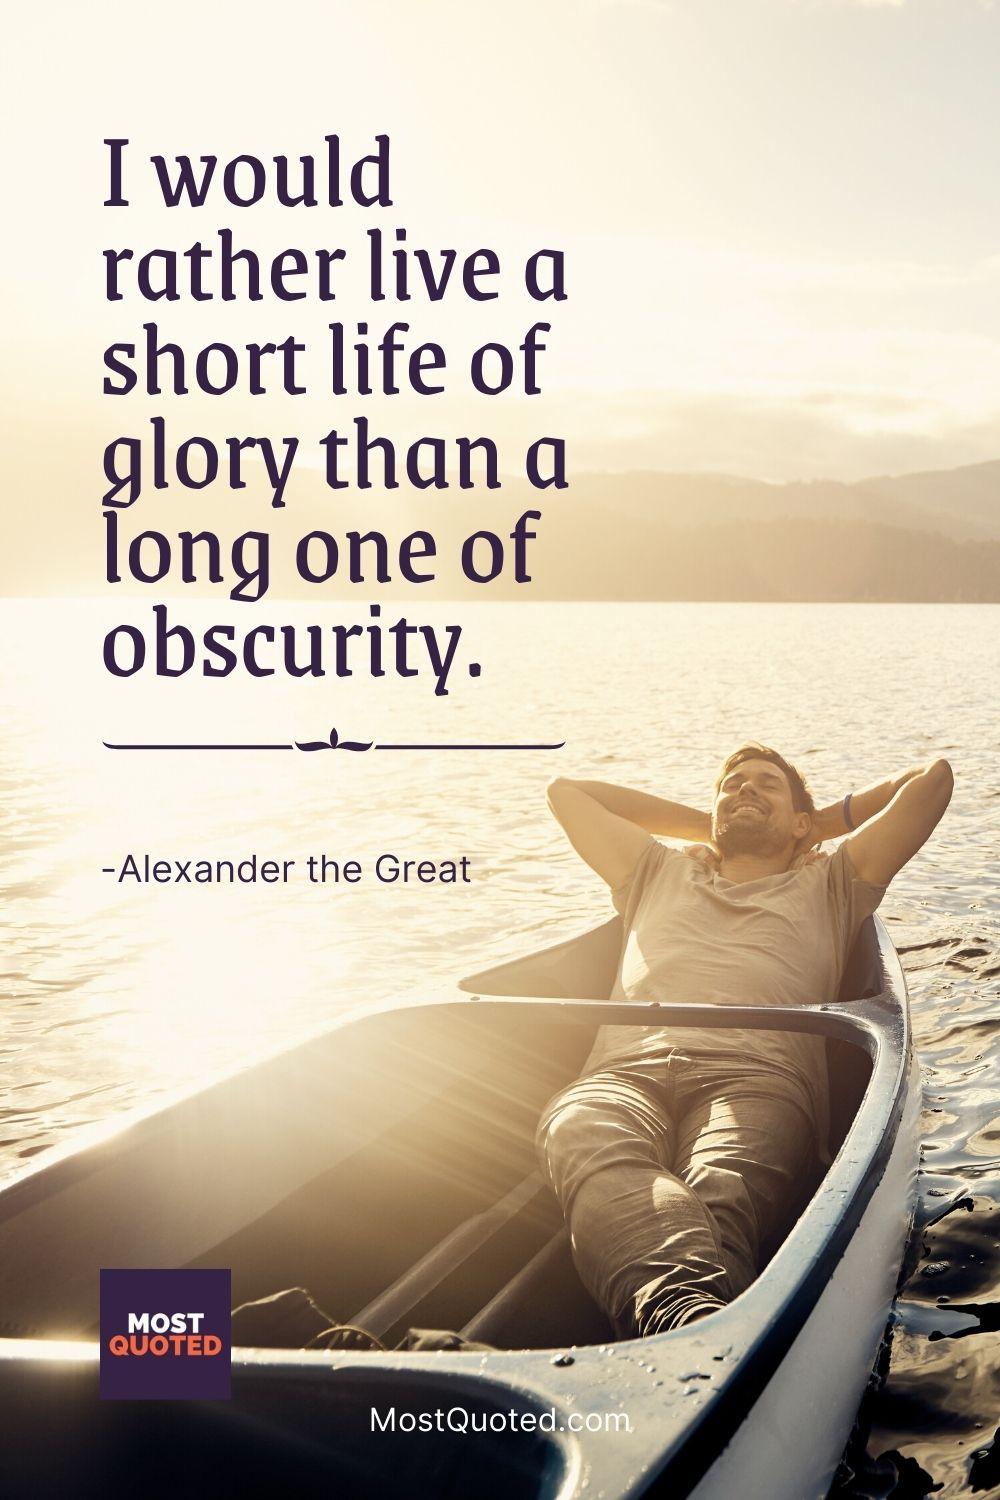 I would rather live a short life of glory than a long one of obscurity. - Alexander the Great